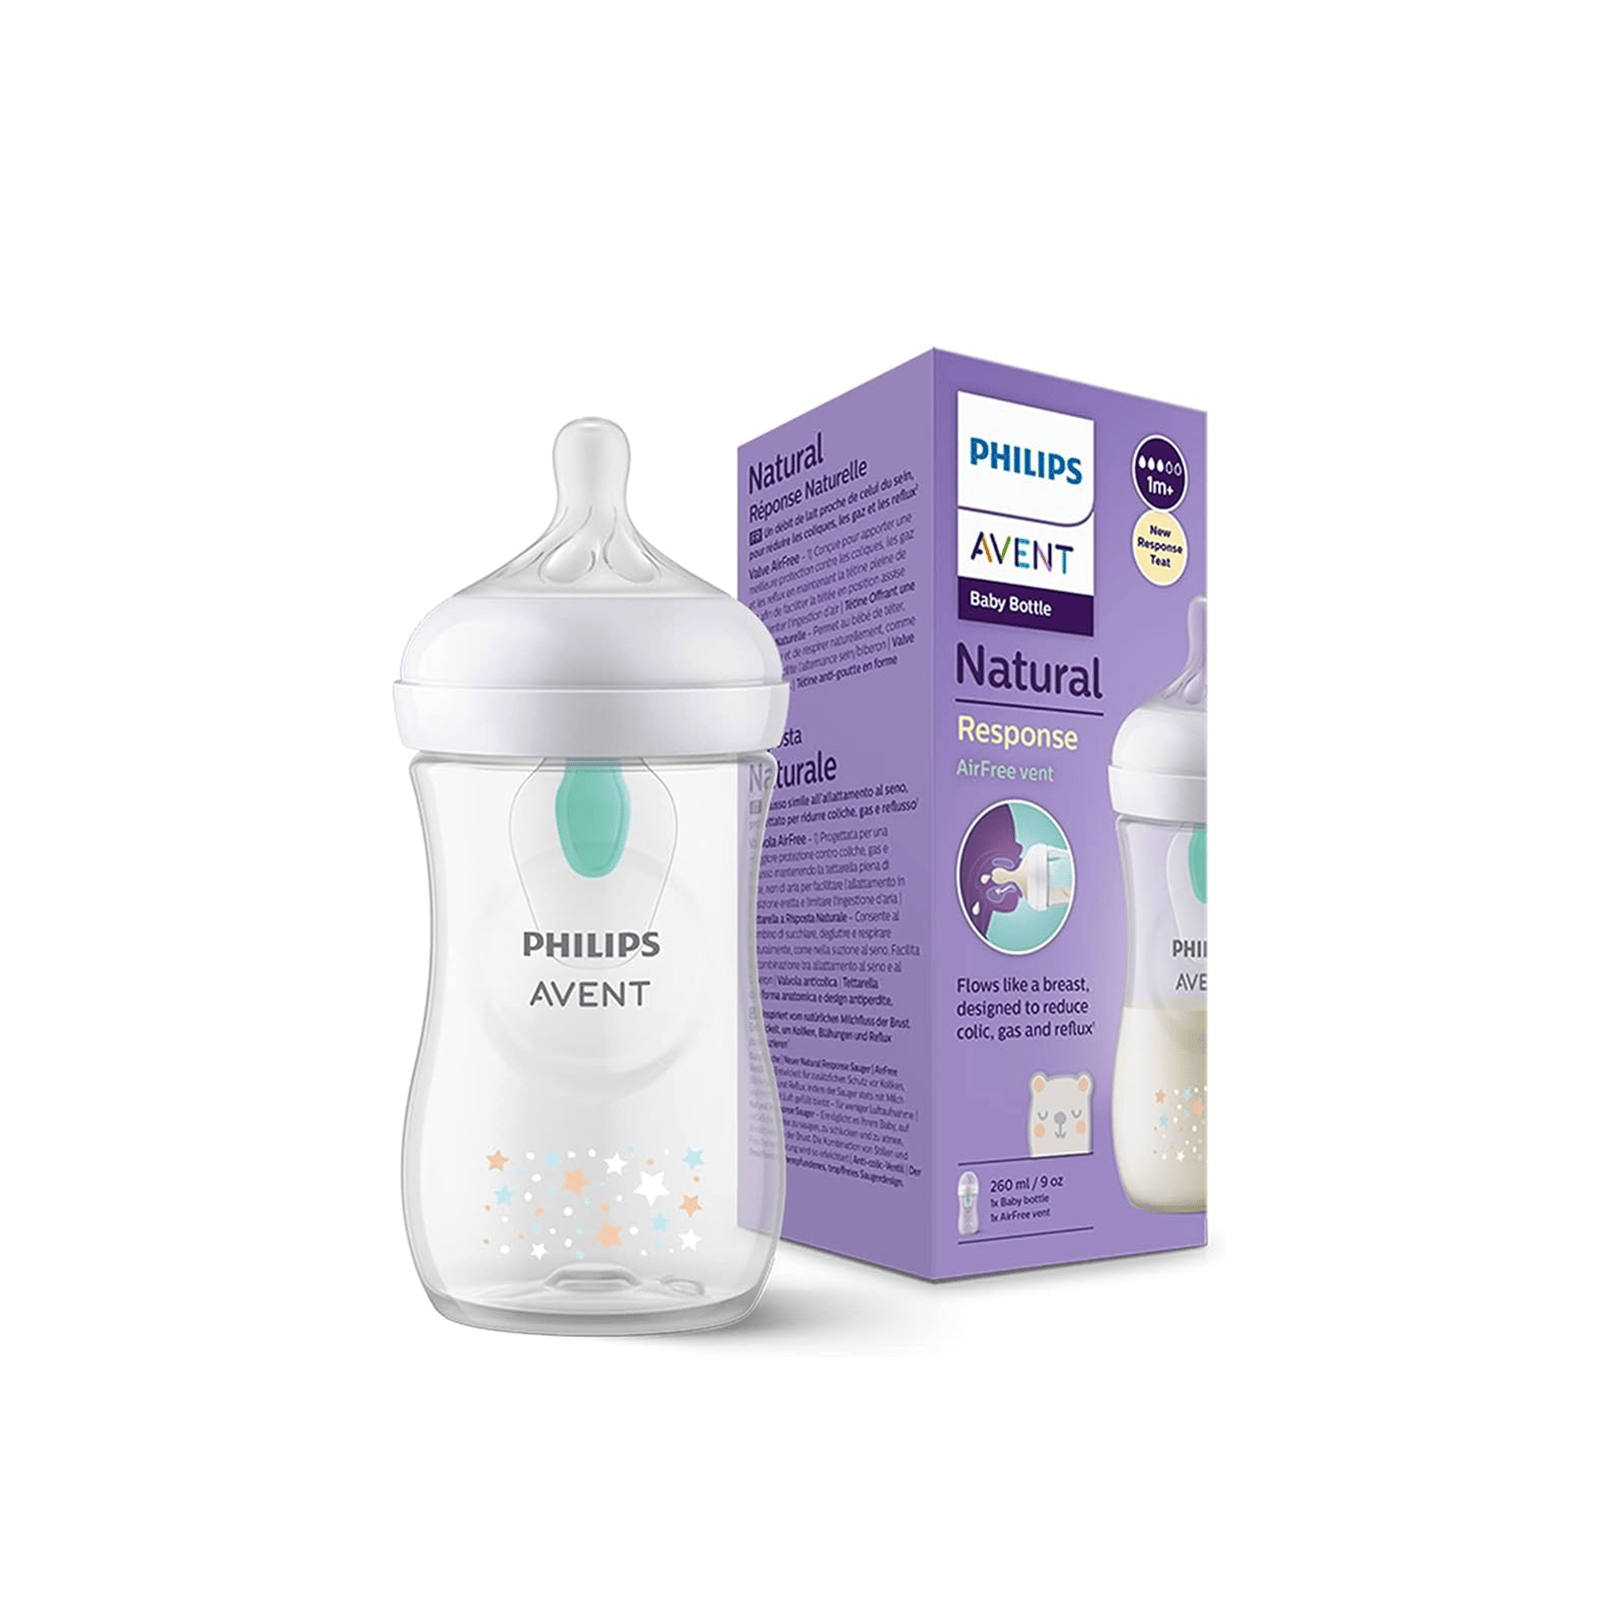 https://static.beautytocare.com/cdn-cgi/image/width=1600,height=1600,f=auto/media/catalog/product//p/h/philips-avent-natural-response-airfree-vent-baby-bottle-1m-bear-260ml_1.png